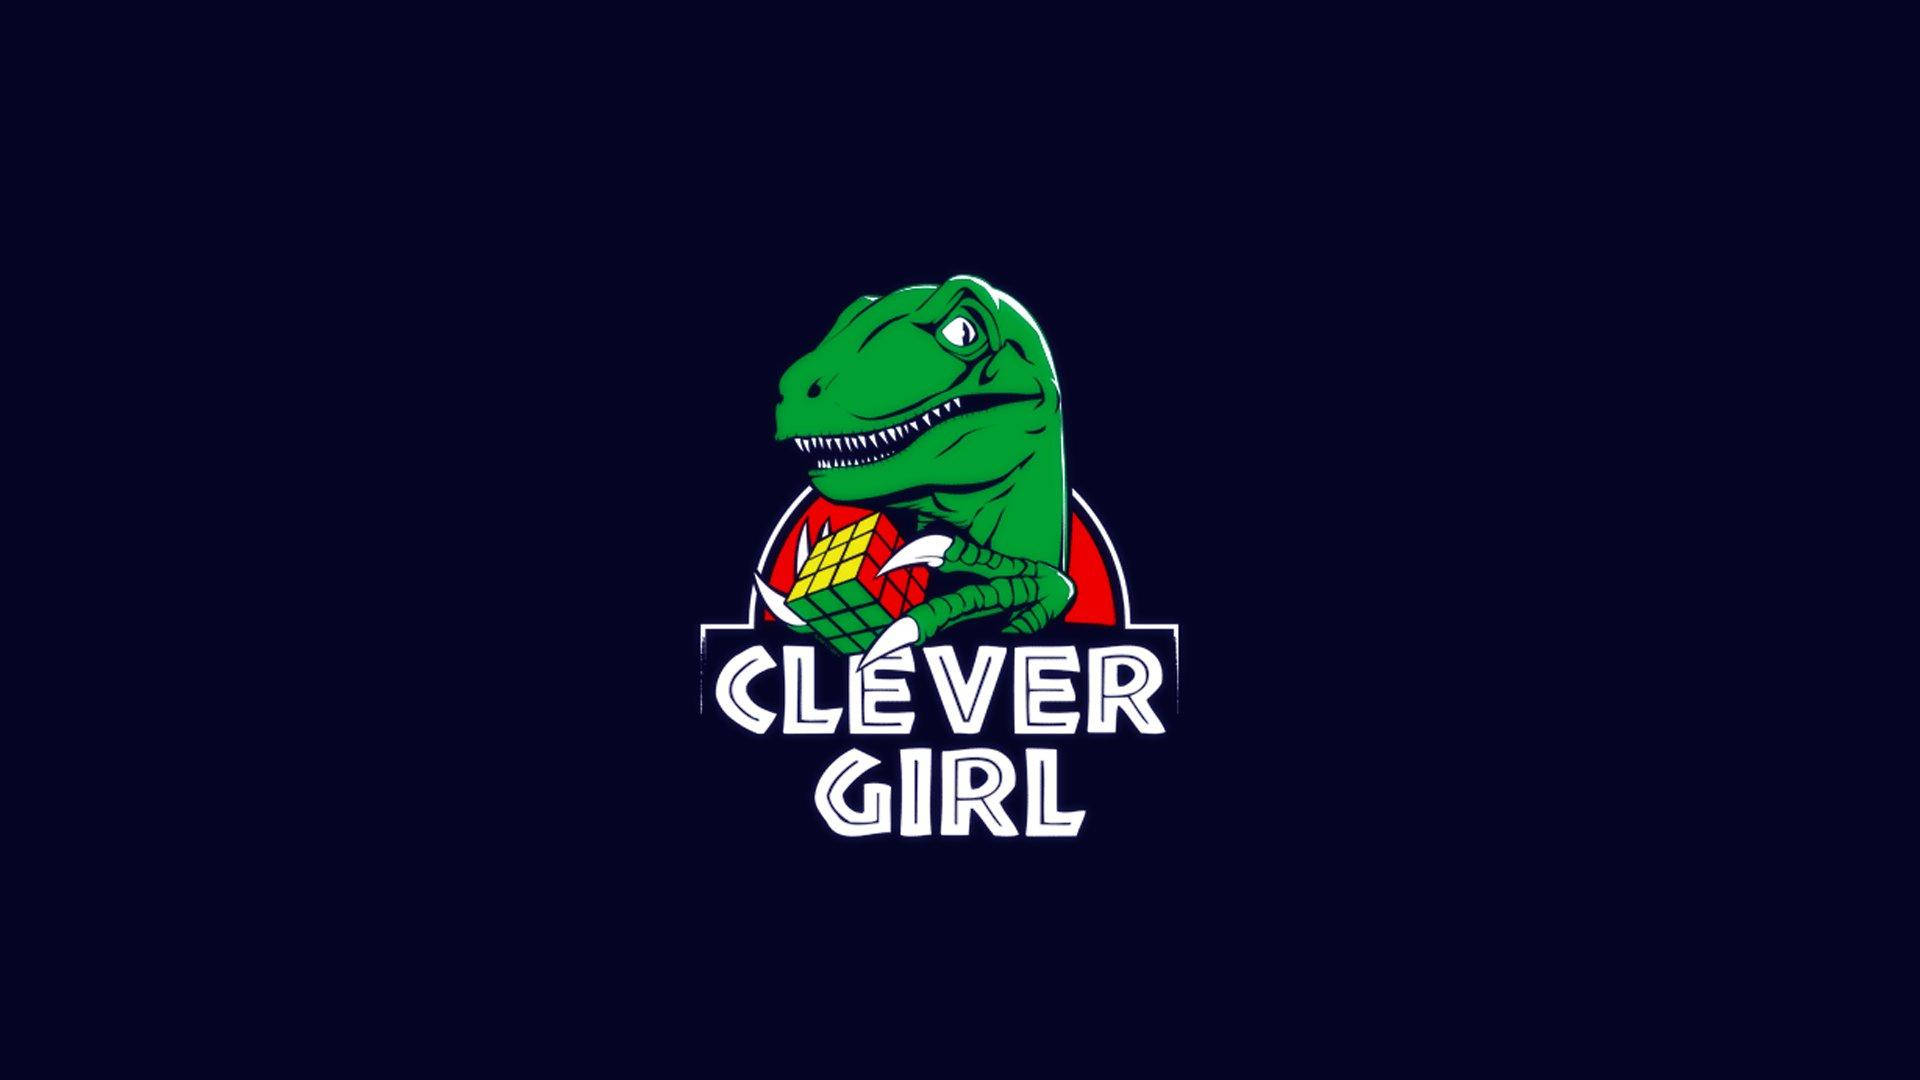 Clever Dinosaur With Rubik's Cube Wallpaper